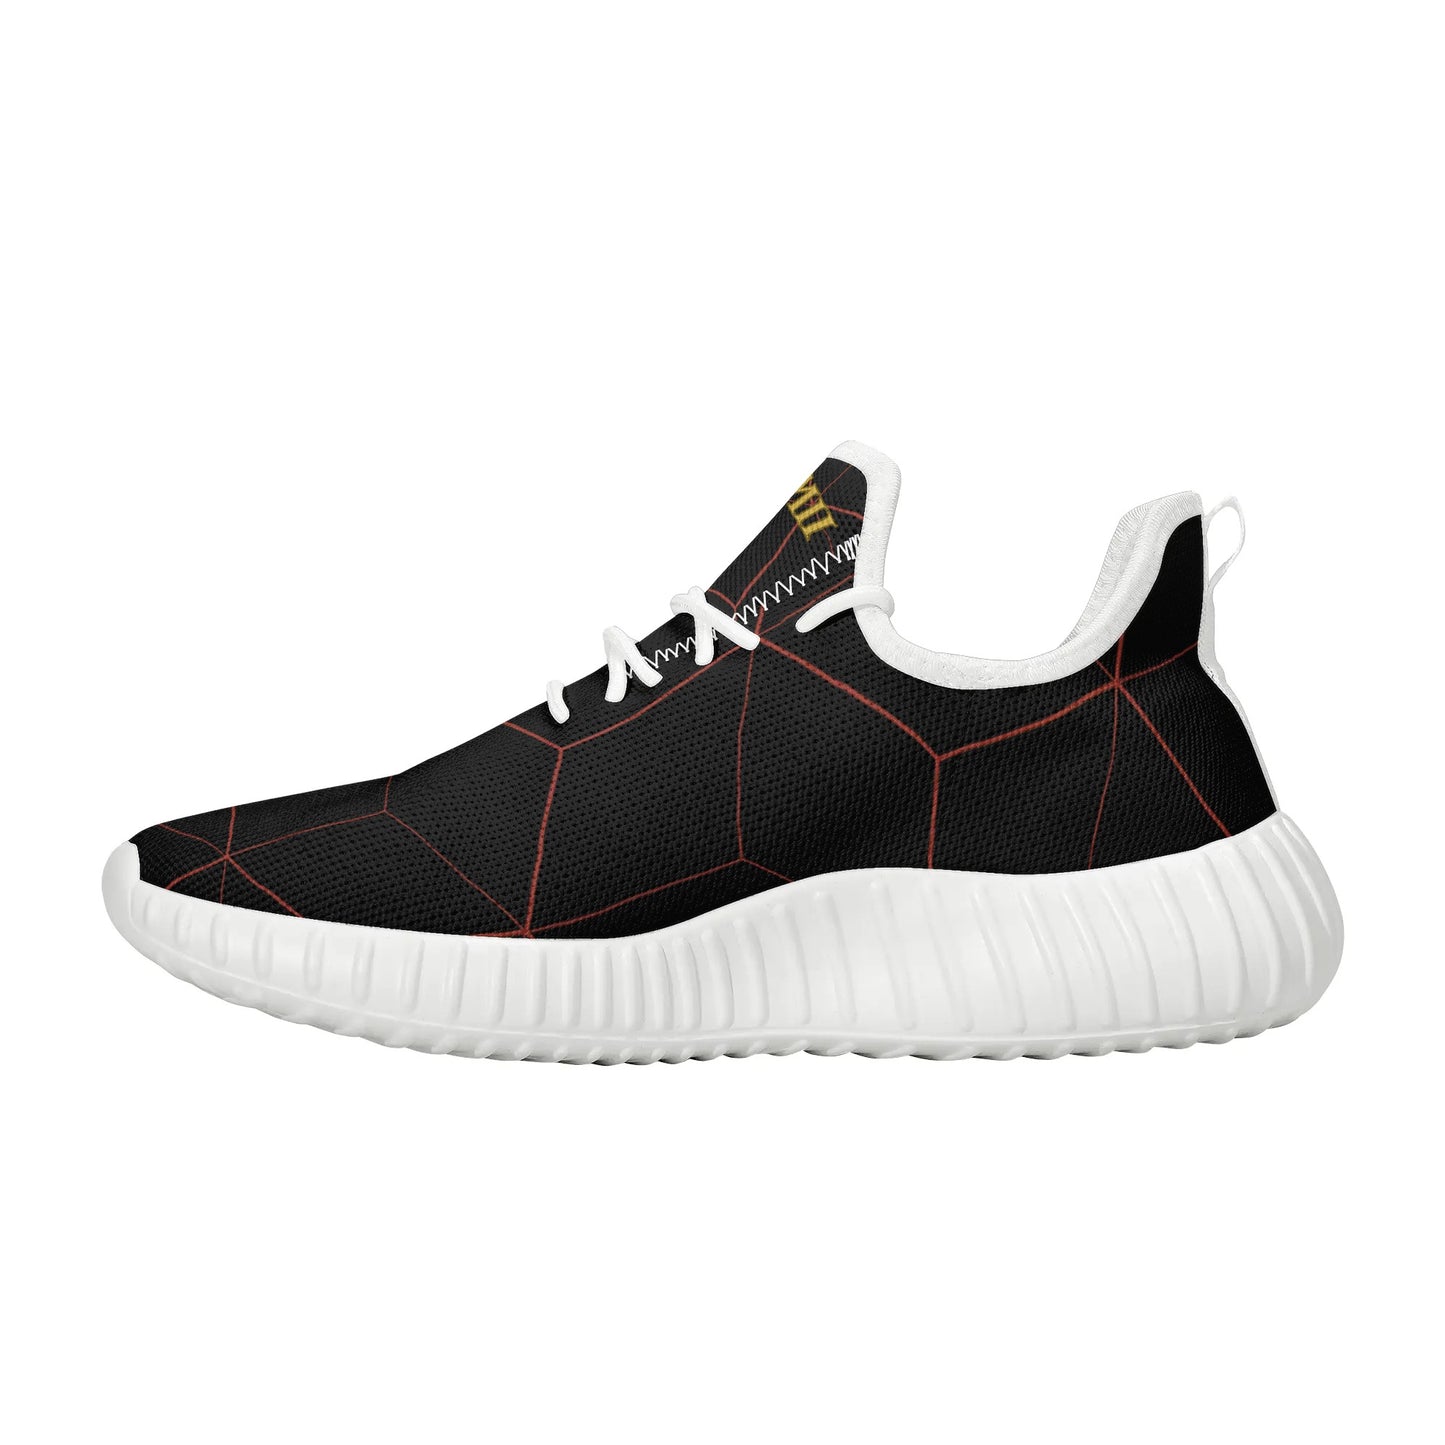 Mens DuGamii Black and Red Mesh Knit Sneakers with White Bottoms